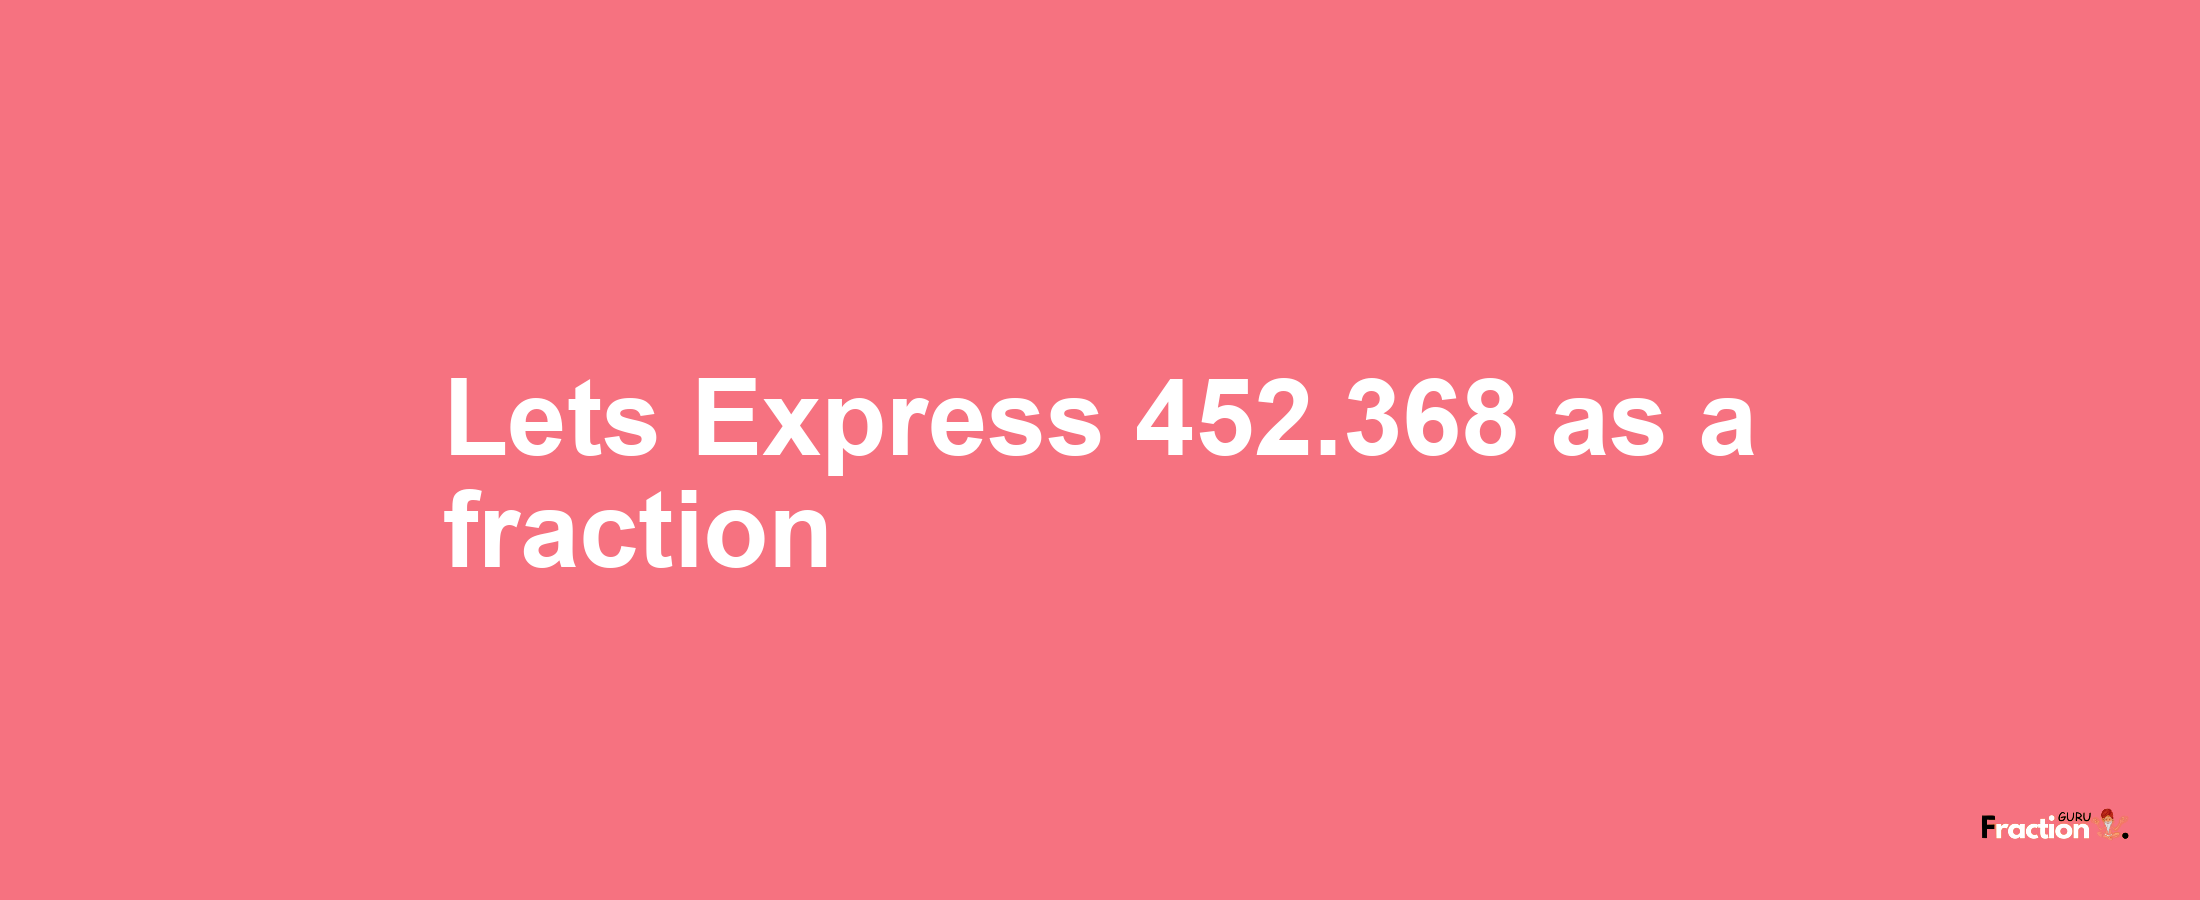 Lets Express 452.368 as afraction